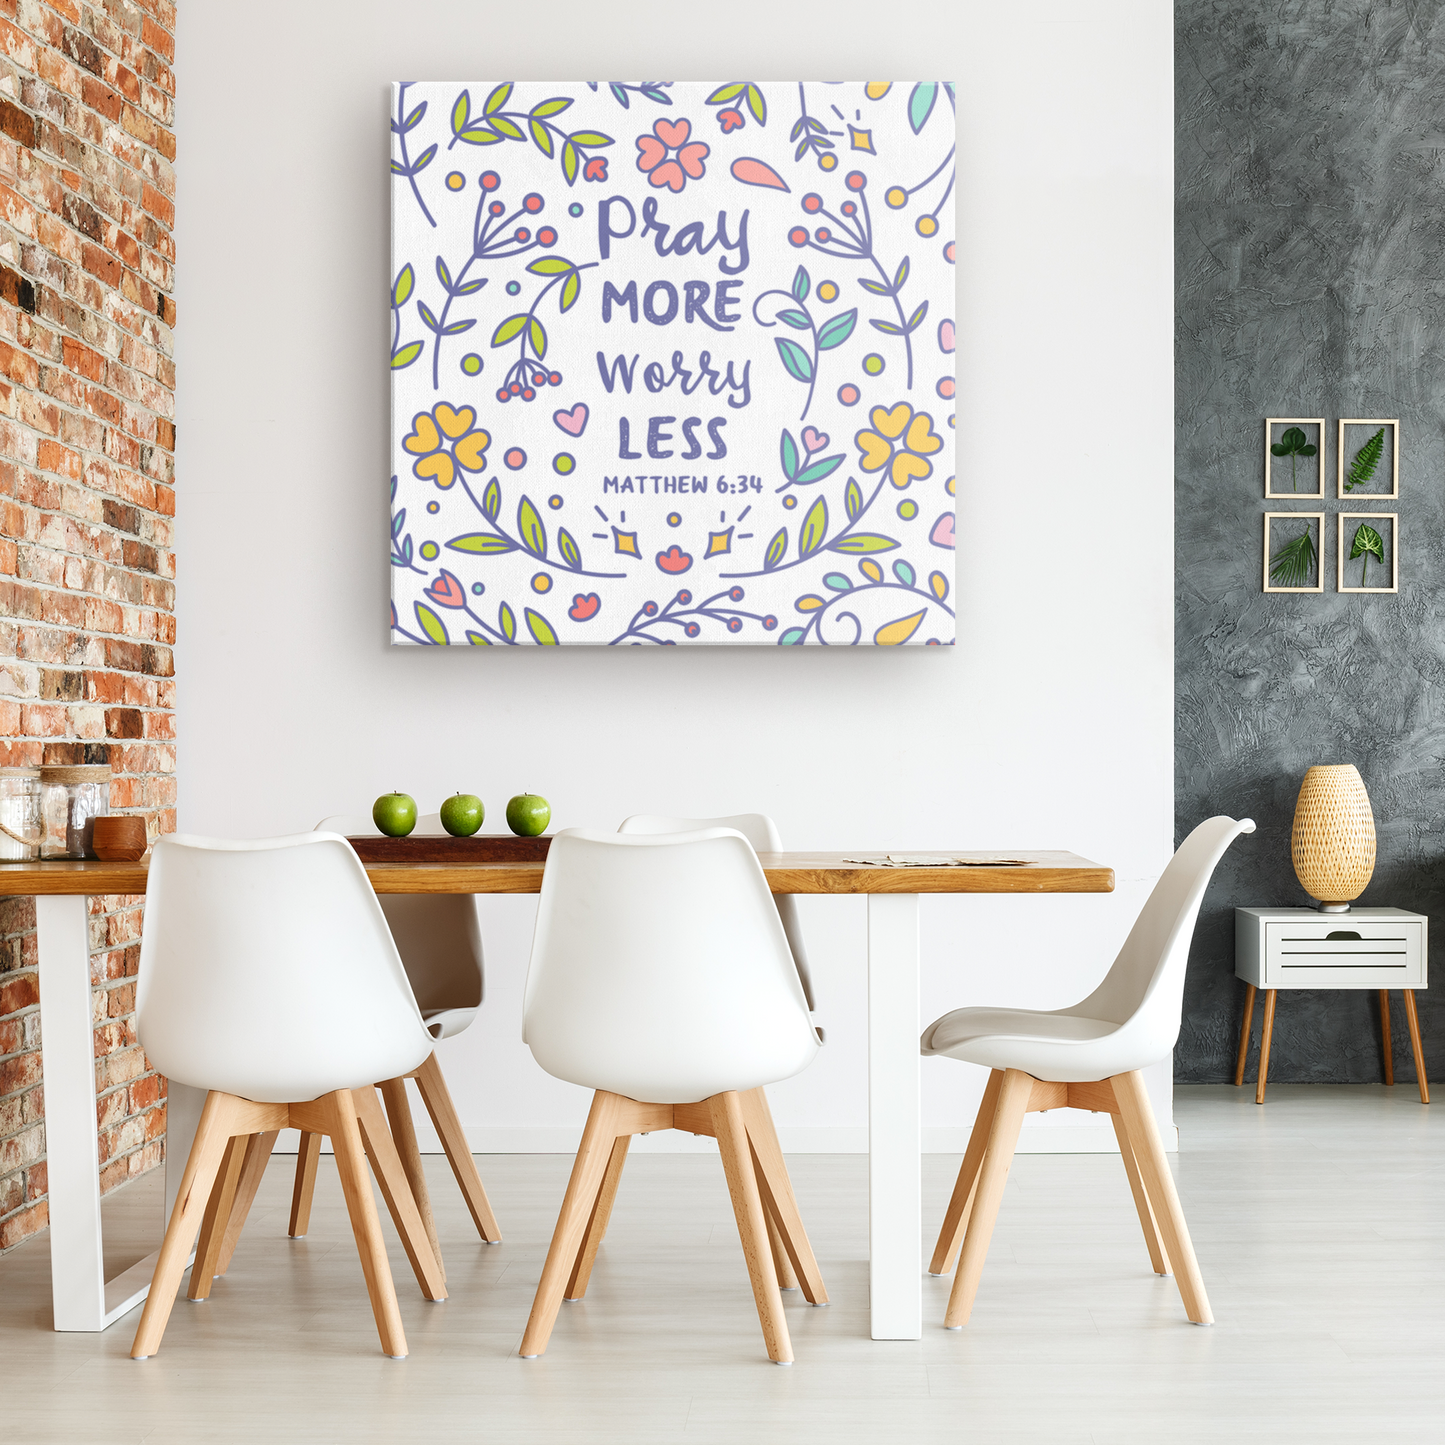 Pray More Worry Less, Matthew 6:34 - Square Gallery Canvas Wrap